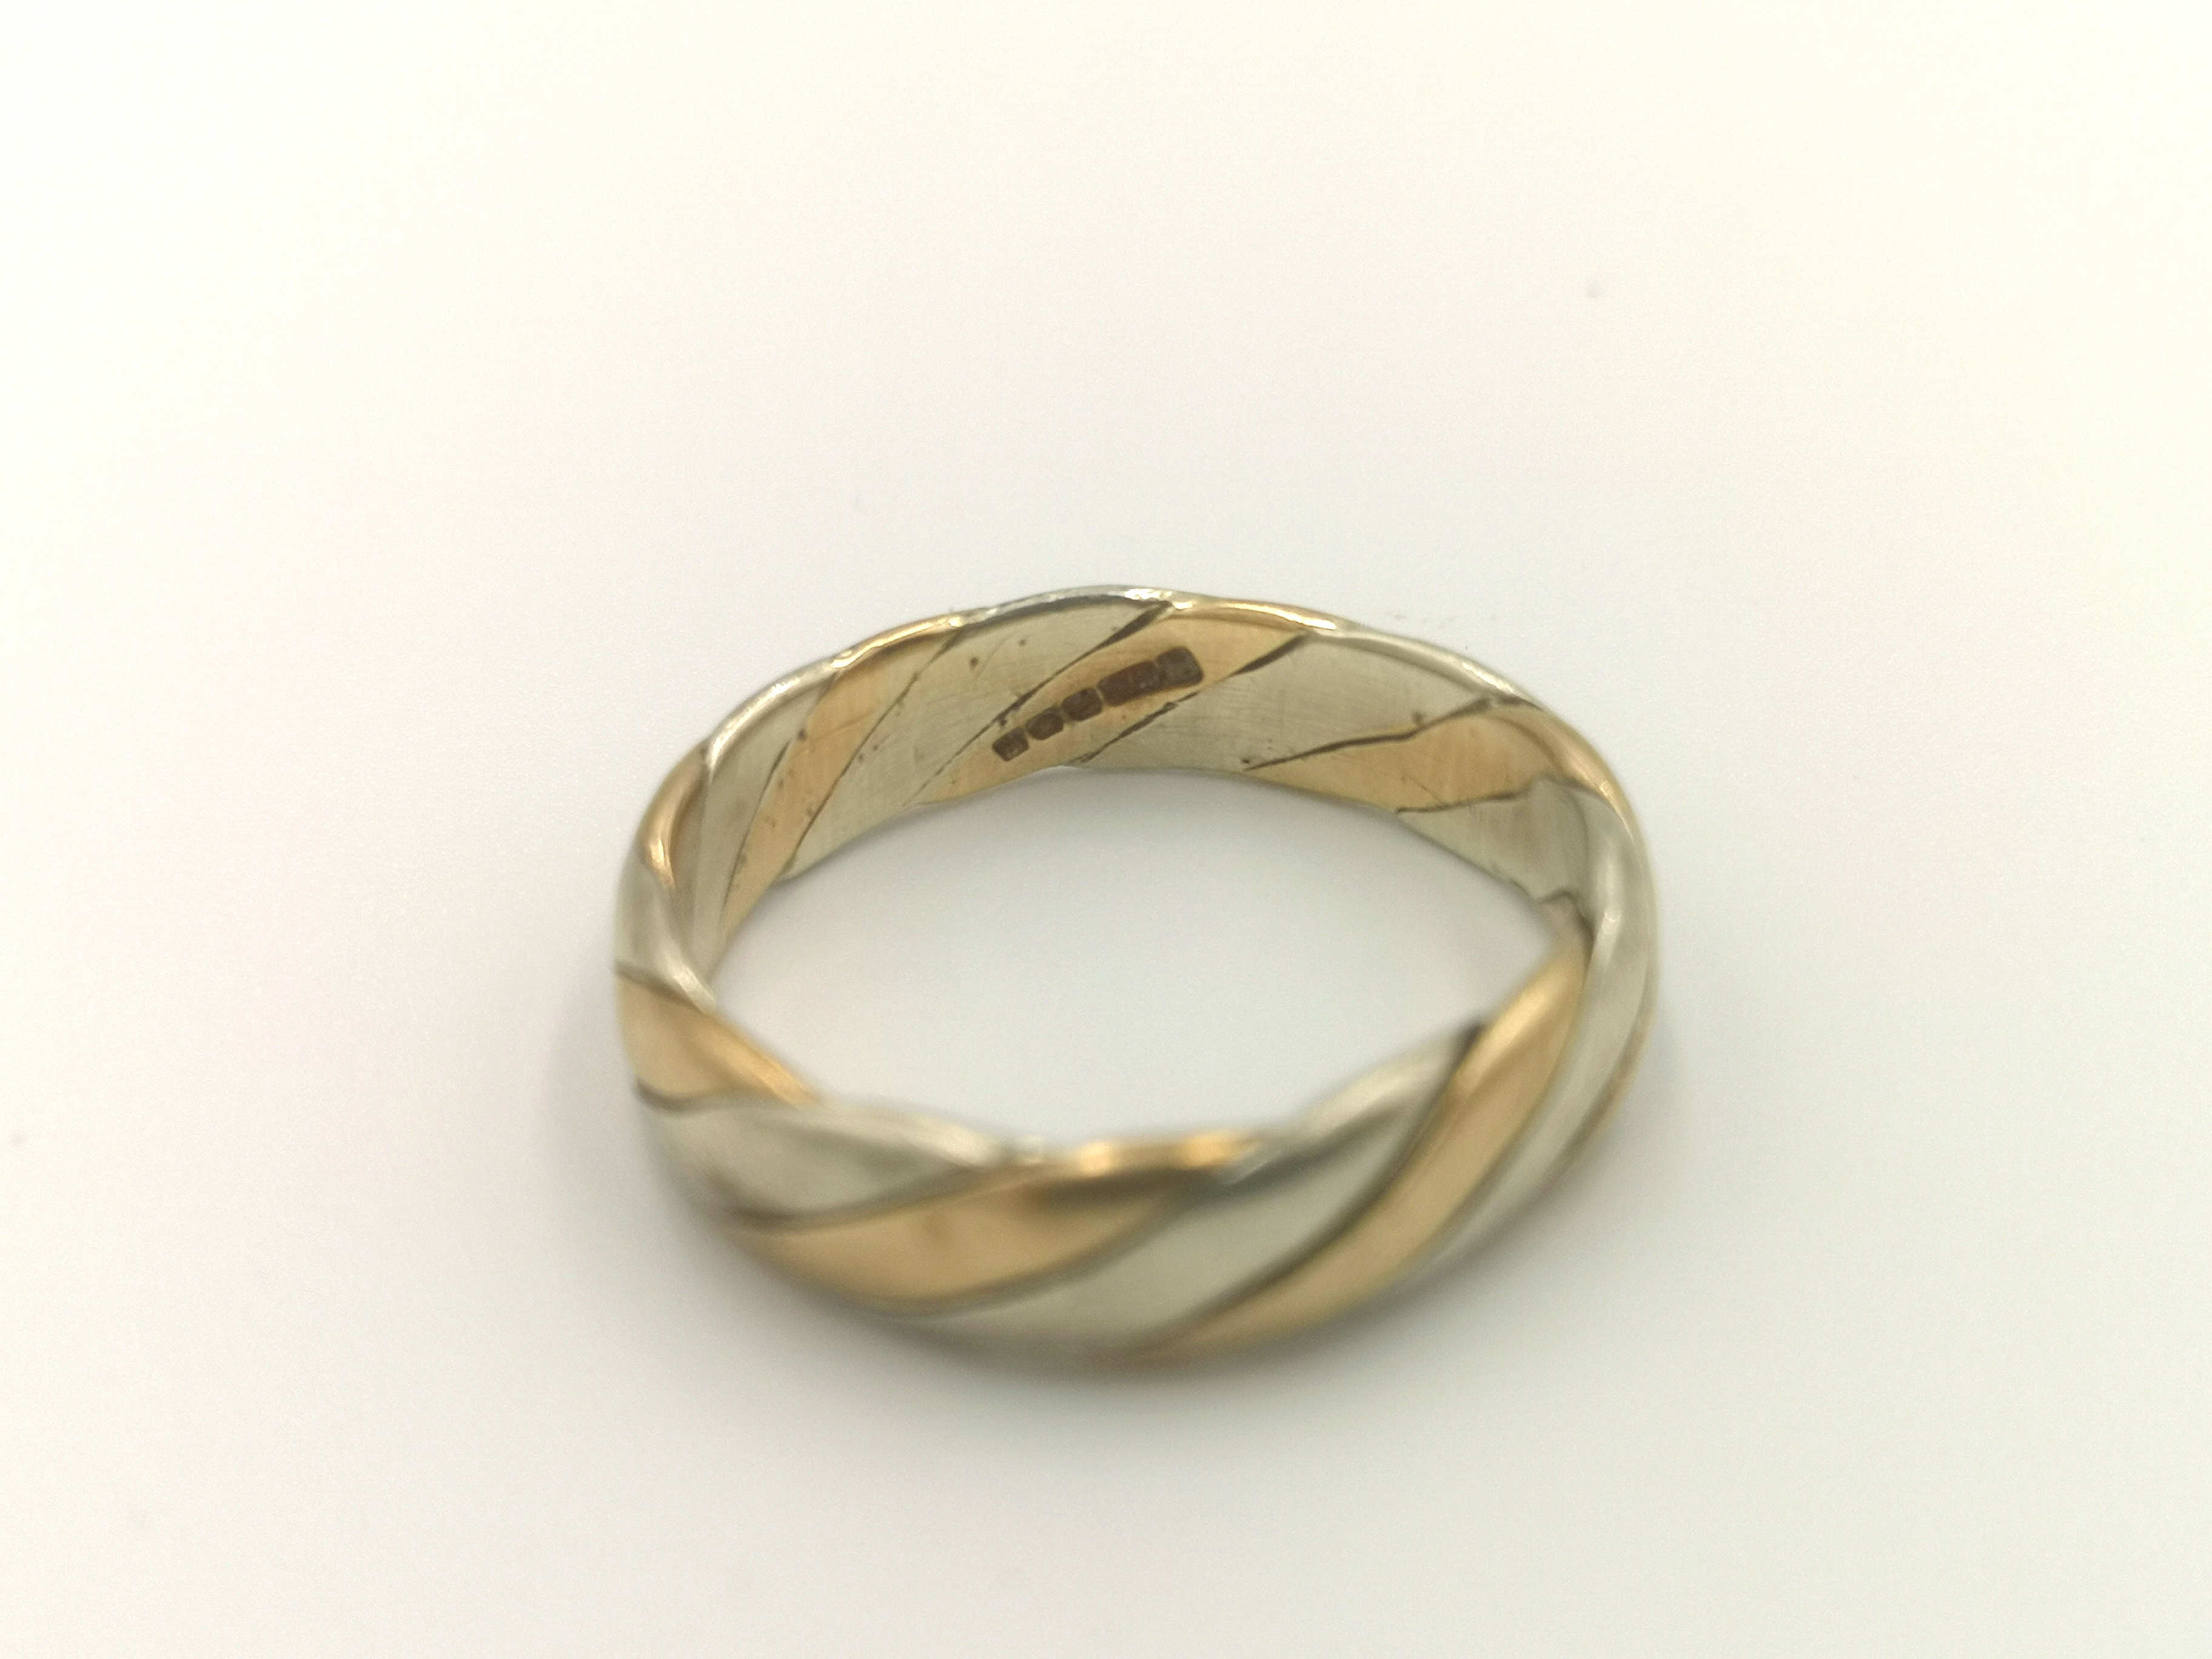 9ct gold ring - Image 4 of 4